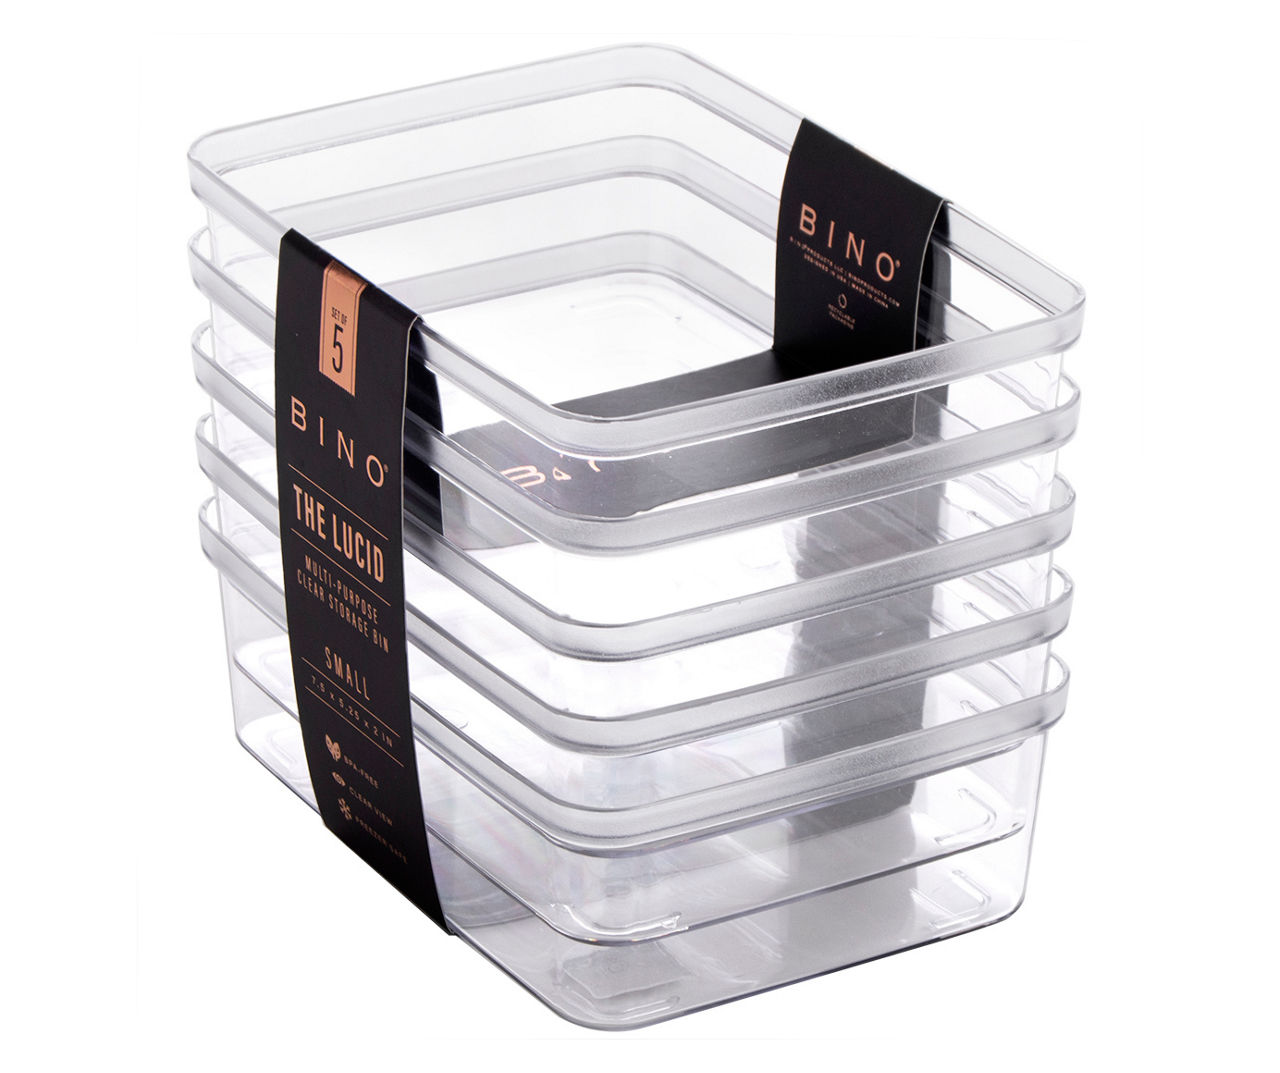 BINO Plastic Storage Containers, Small - 4 Pack THE LUCID COLLECTION,  Multi-Use Organizer Bins Built-In Handles BPA-Free Clear, Fridge, Pantry &  Home